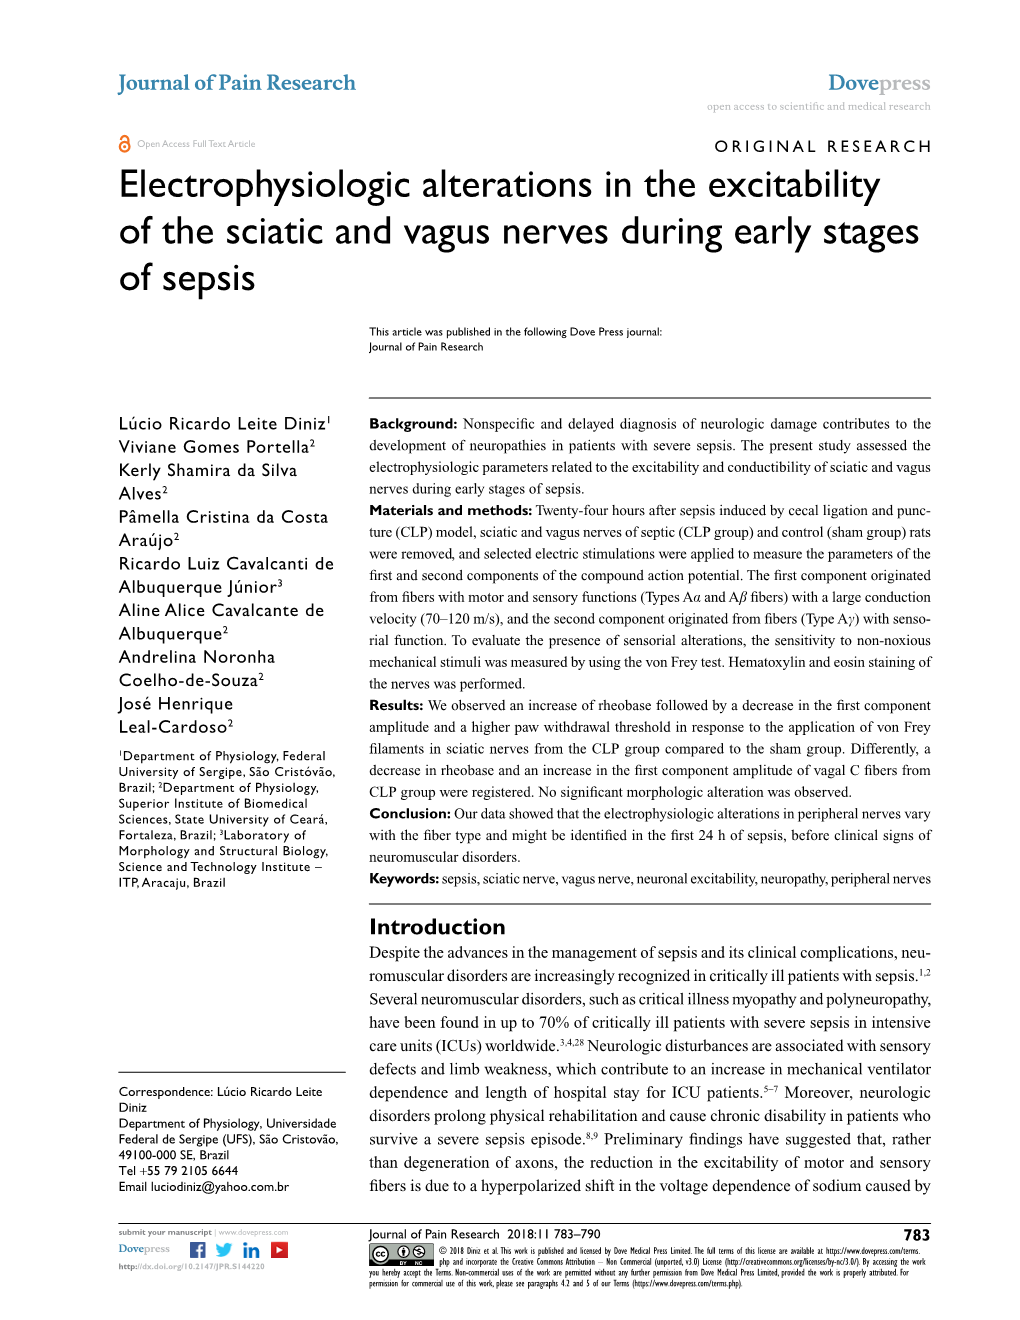 Electrophysiologic Alterations in the Excitability of the Sciatic and Vagus Nerves During Early Stages of Sepsis